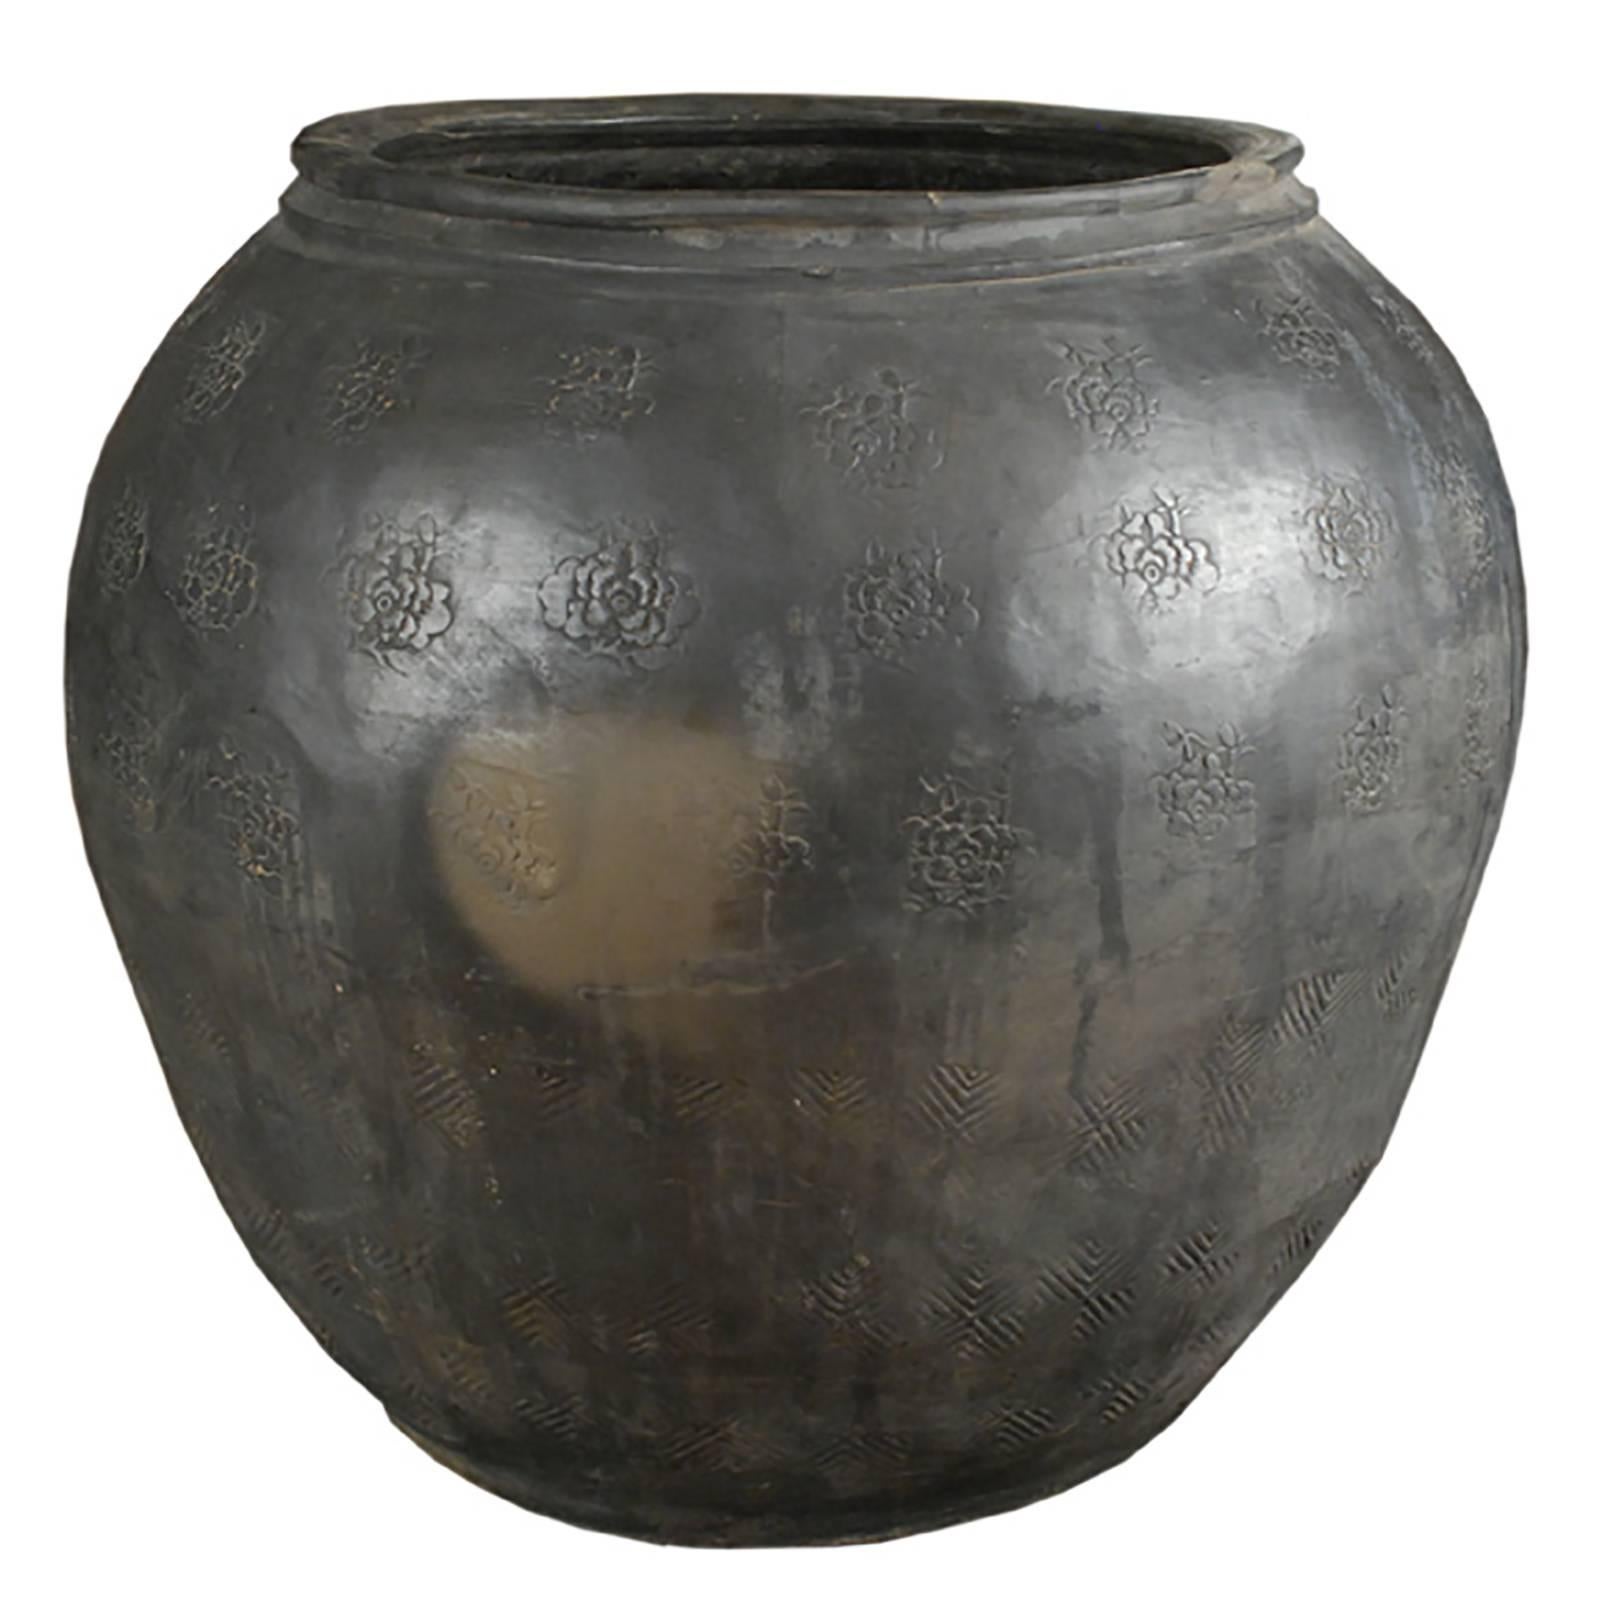 Artisans in the Shanxi region of China handcrafted this unique jar over a century ago. It is stamped with an irregular floral pattern. The matte black clay is characteristic of processes perfected by many generations of ceramicists working at